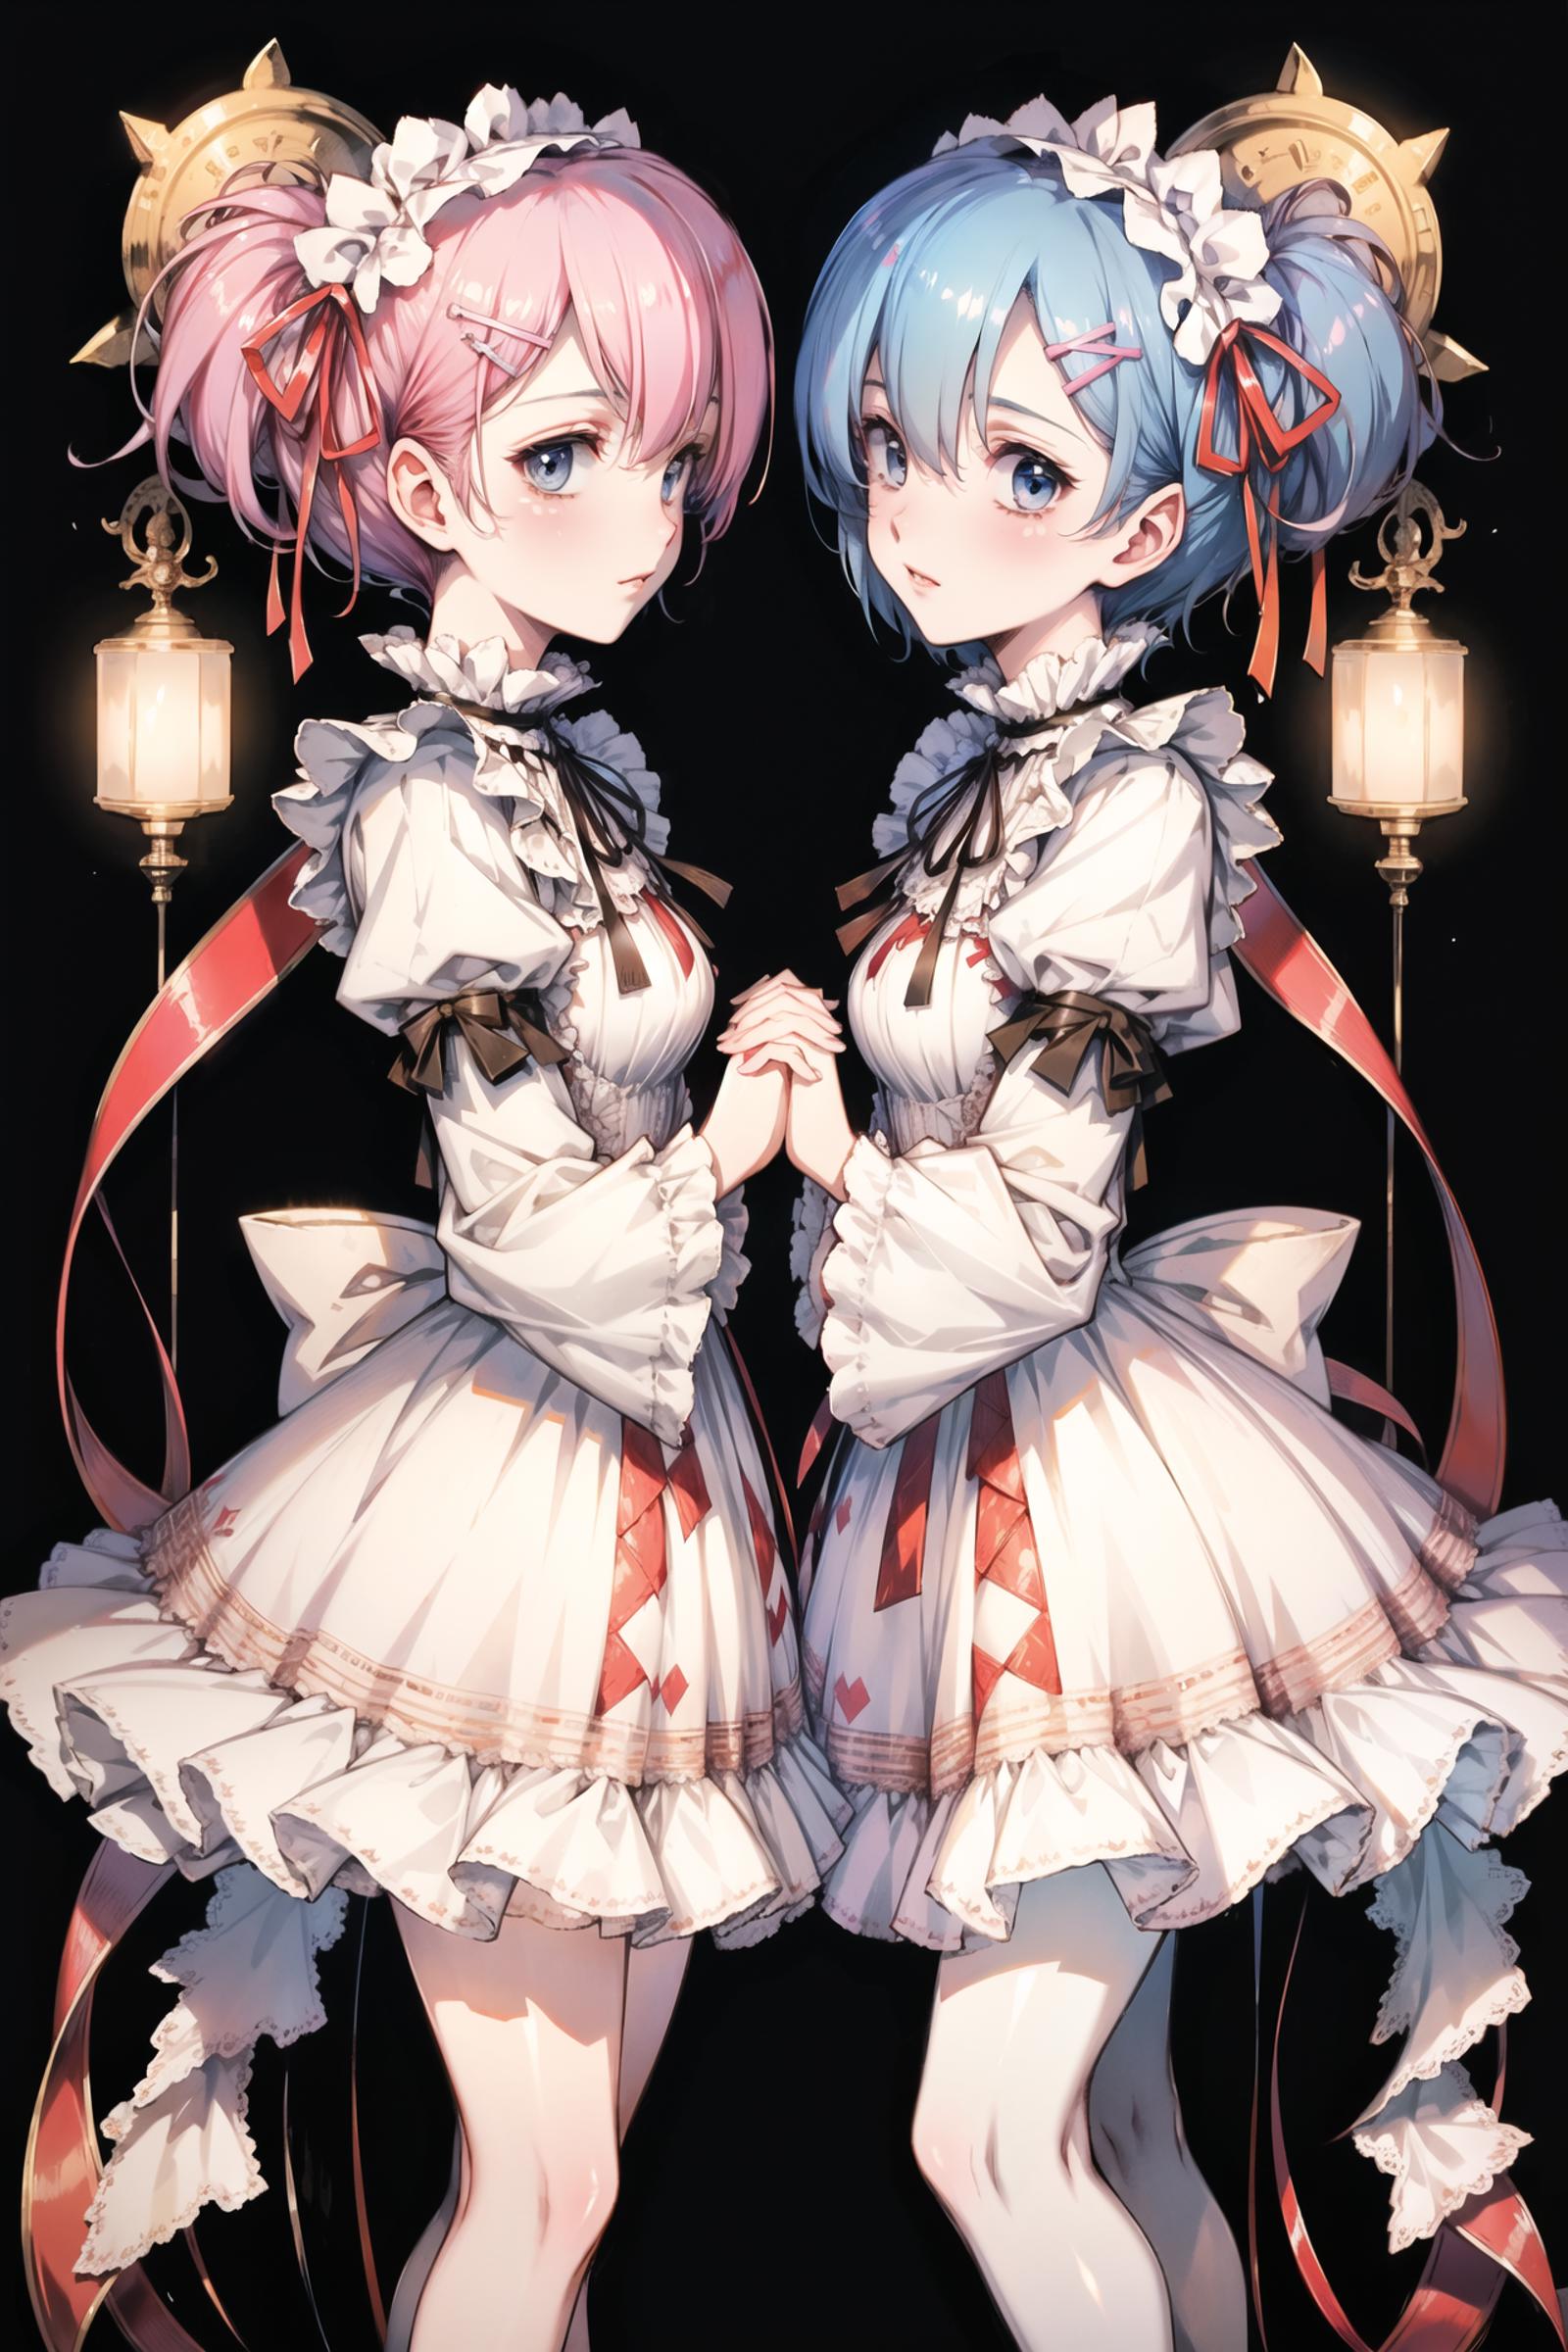 Two Anime Girls in White and Red Dresses with Red Ribbons.